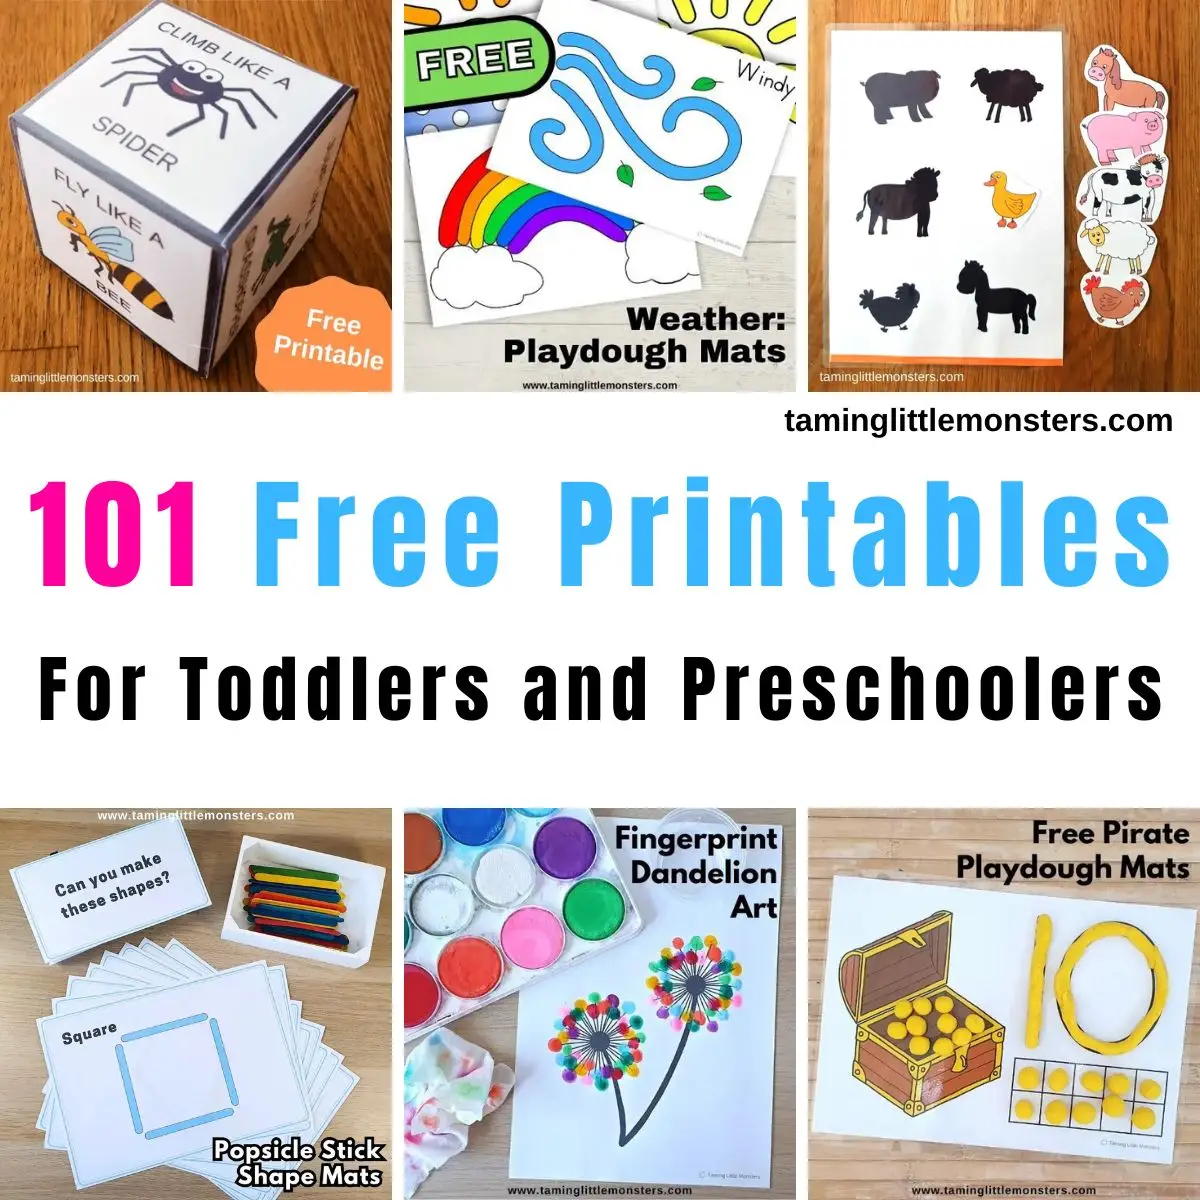 Free Printable Playdough Mats for Toddlers and PreK, Encourages Creative  Play